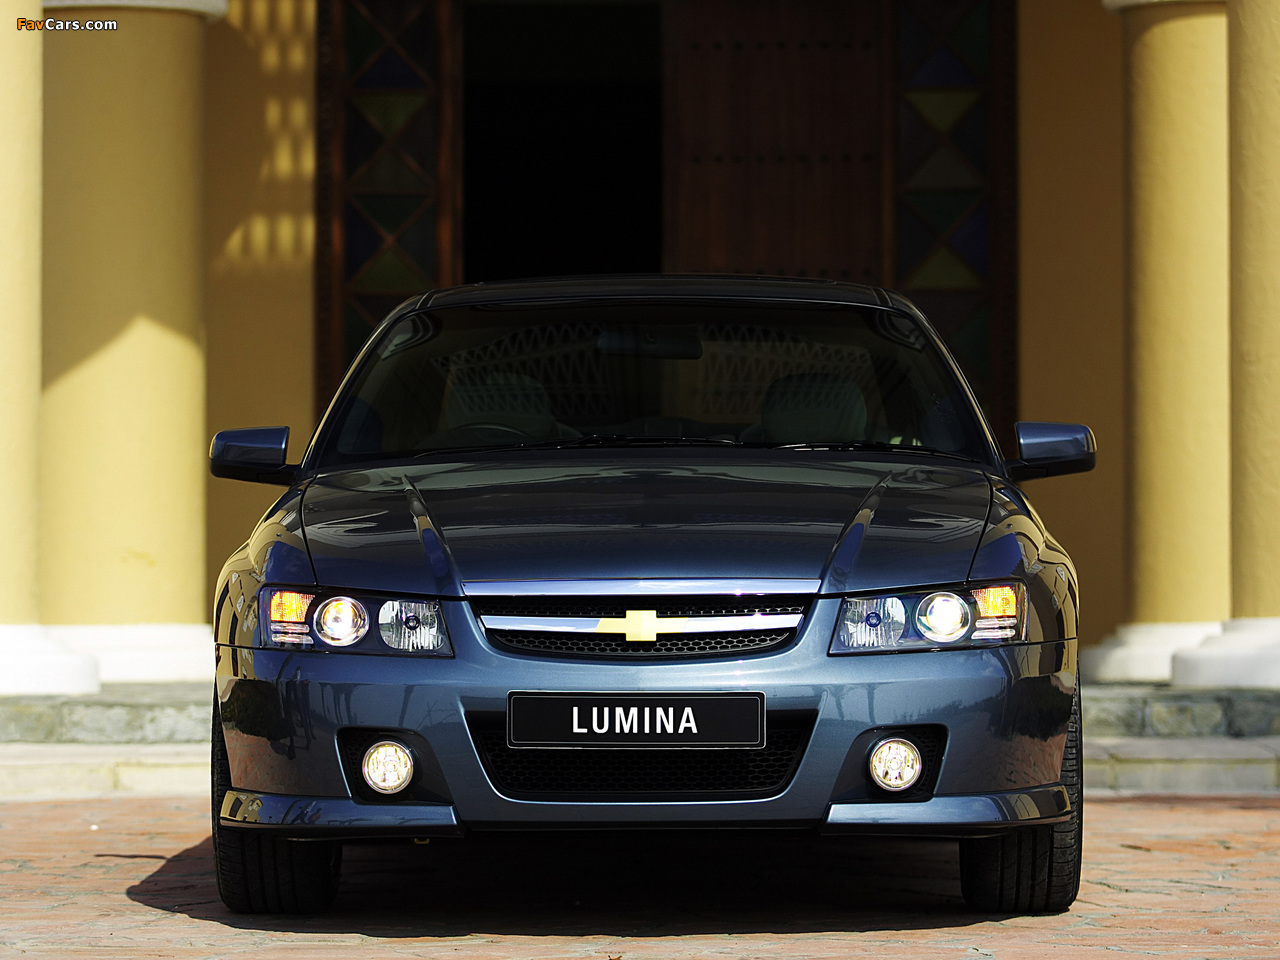 Chevrolet Lumina Royale 2006 pictures (1280 x 960)